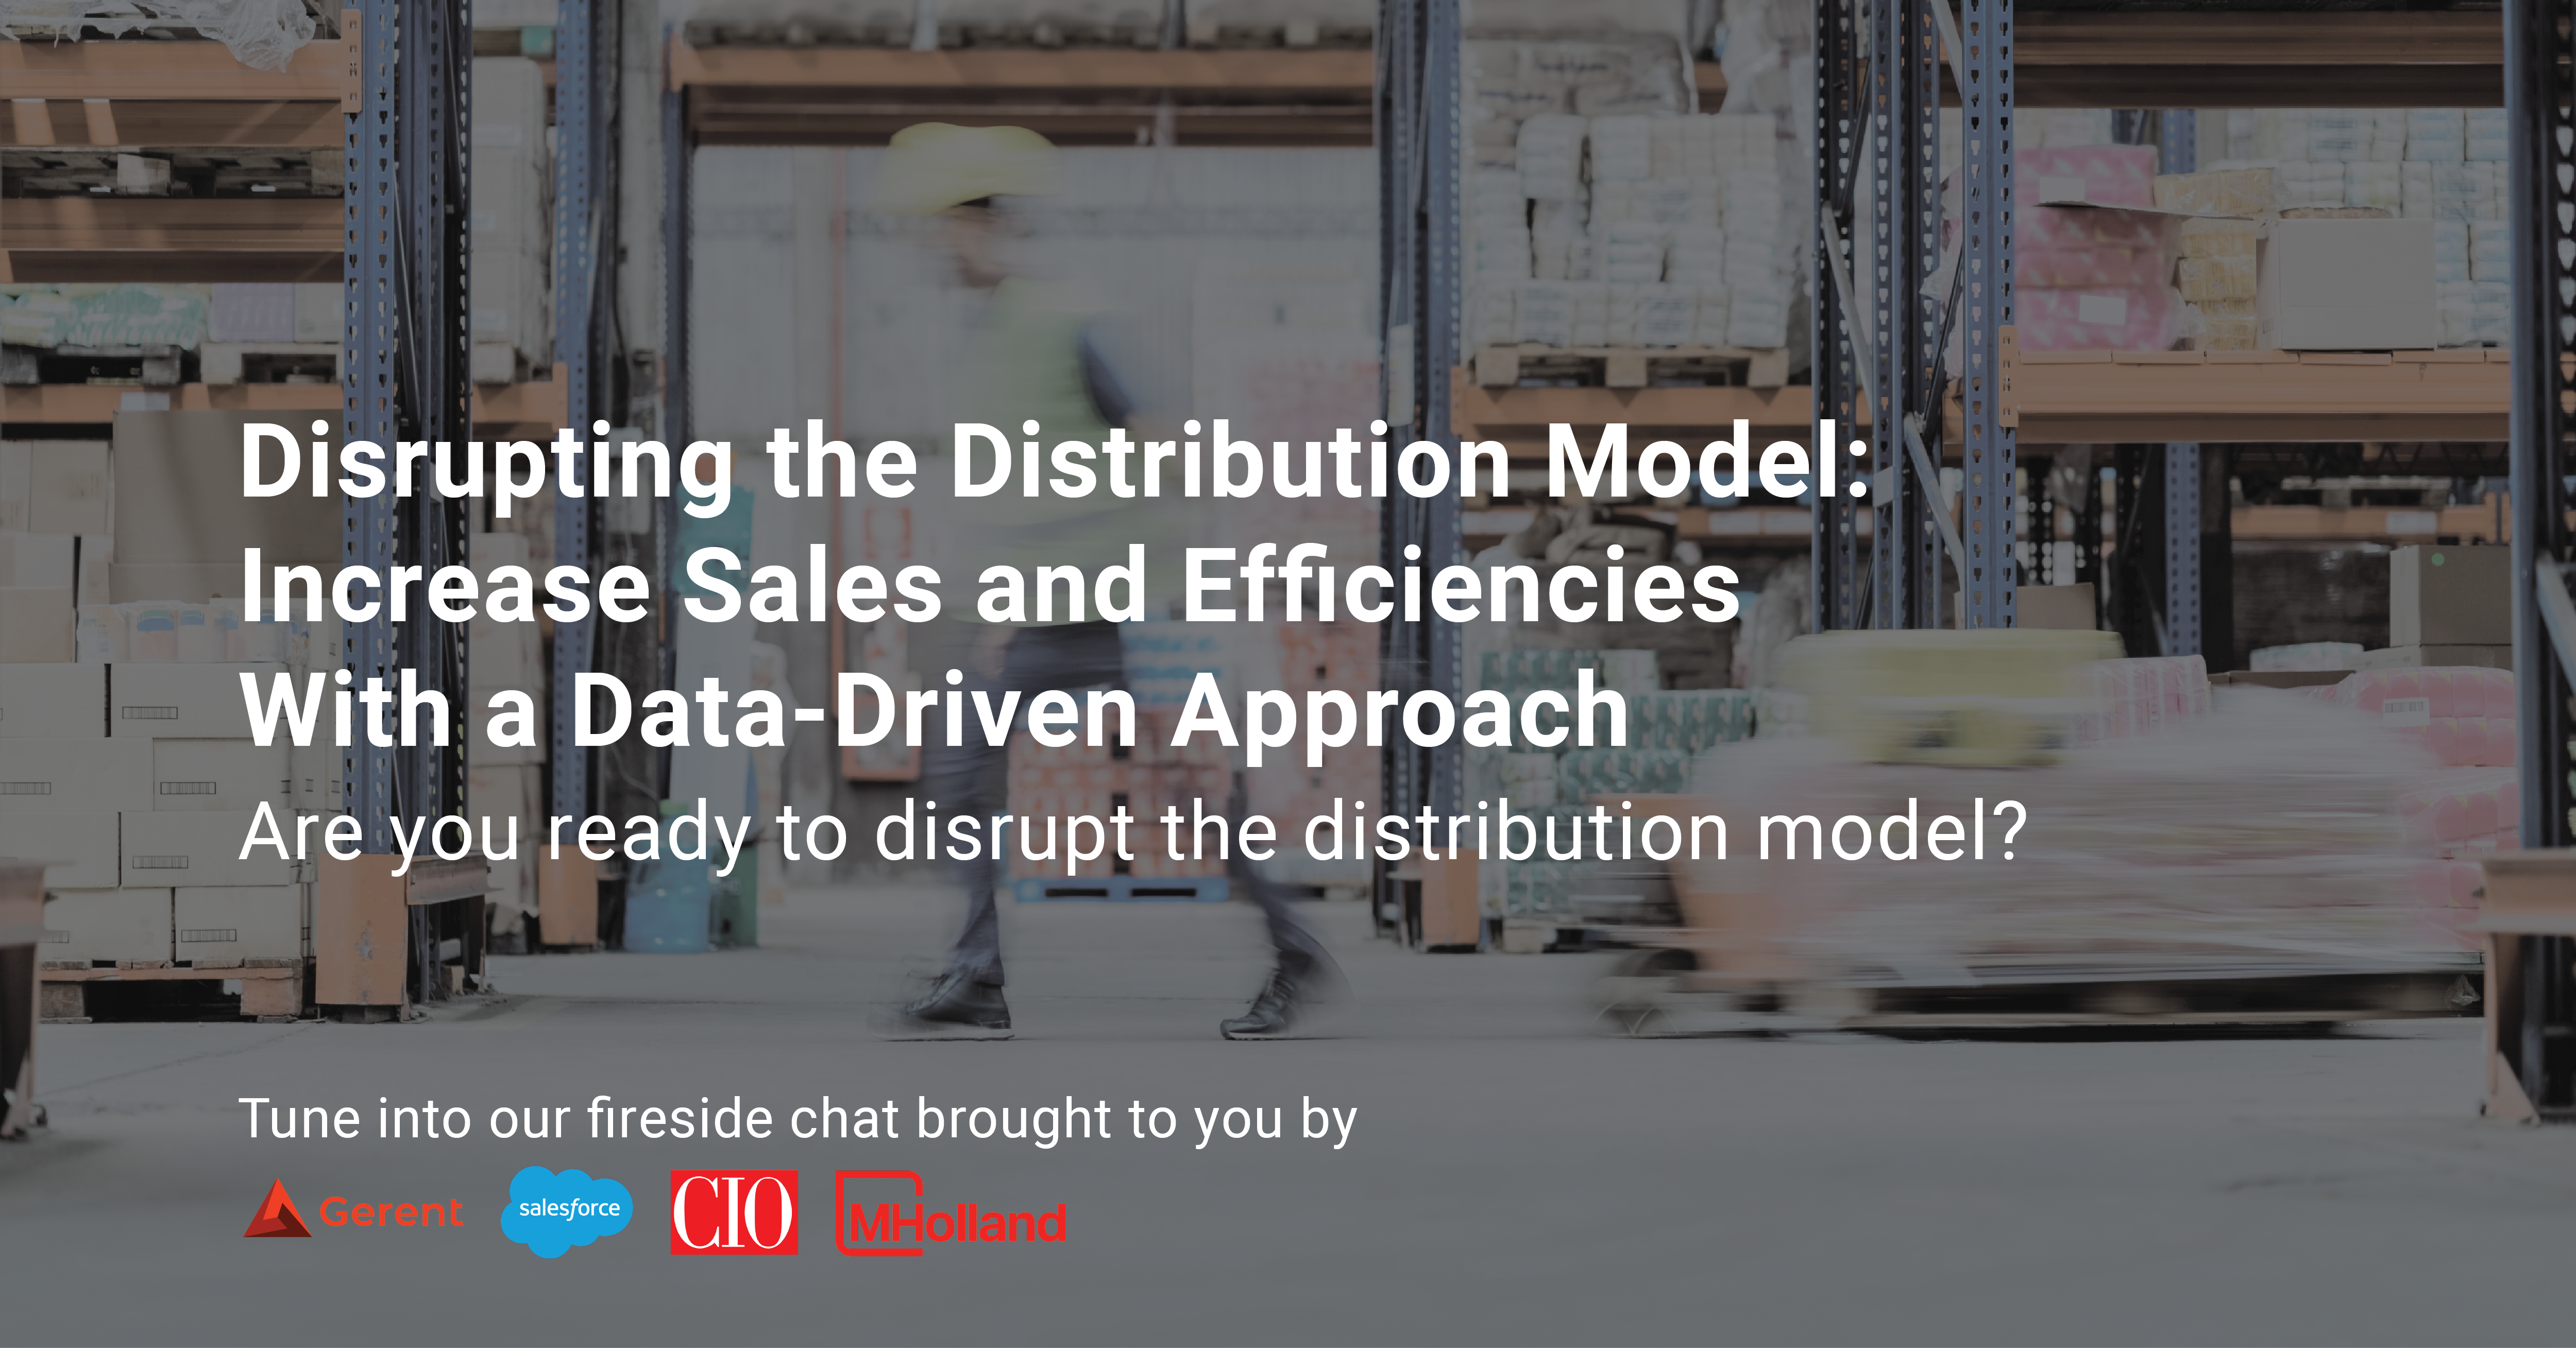 Disrupting the Distribution Model: Increase Sales and Efficiencies With a Data-Driven Approach